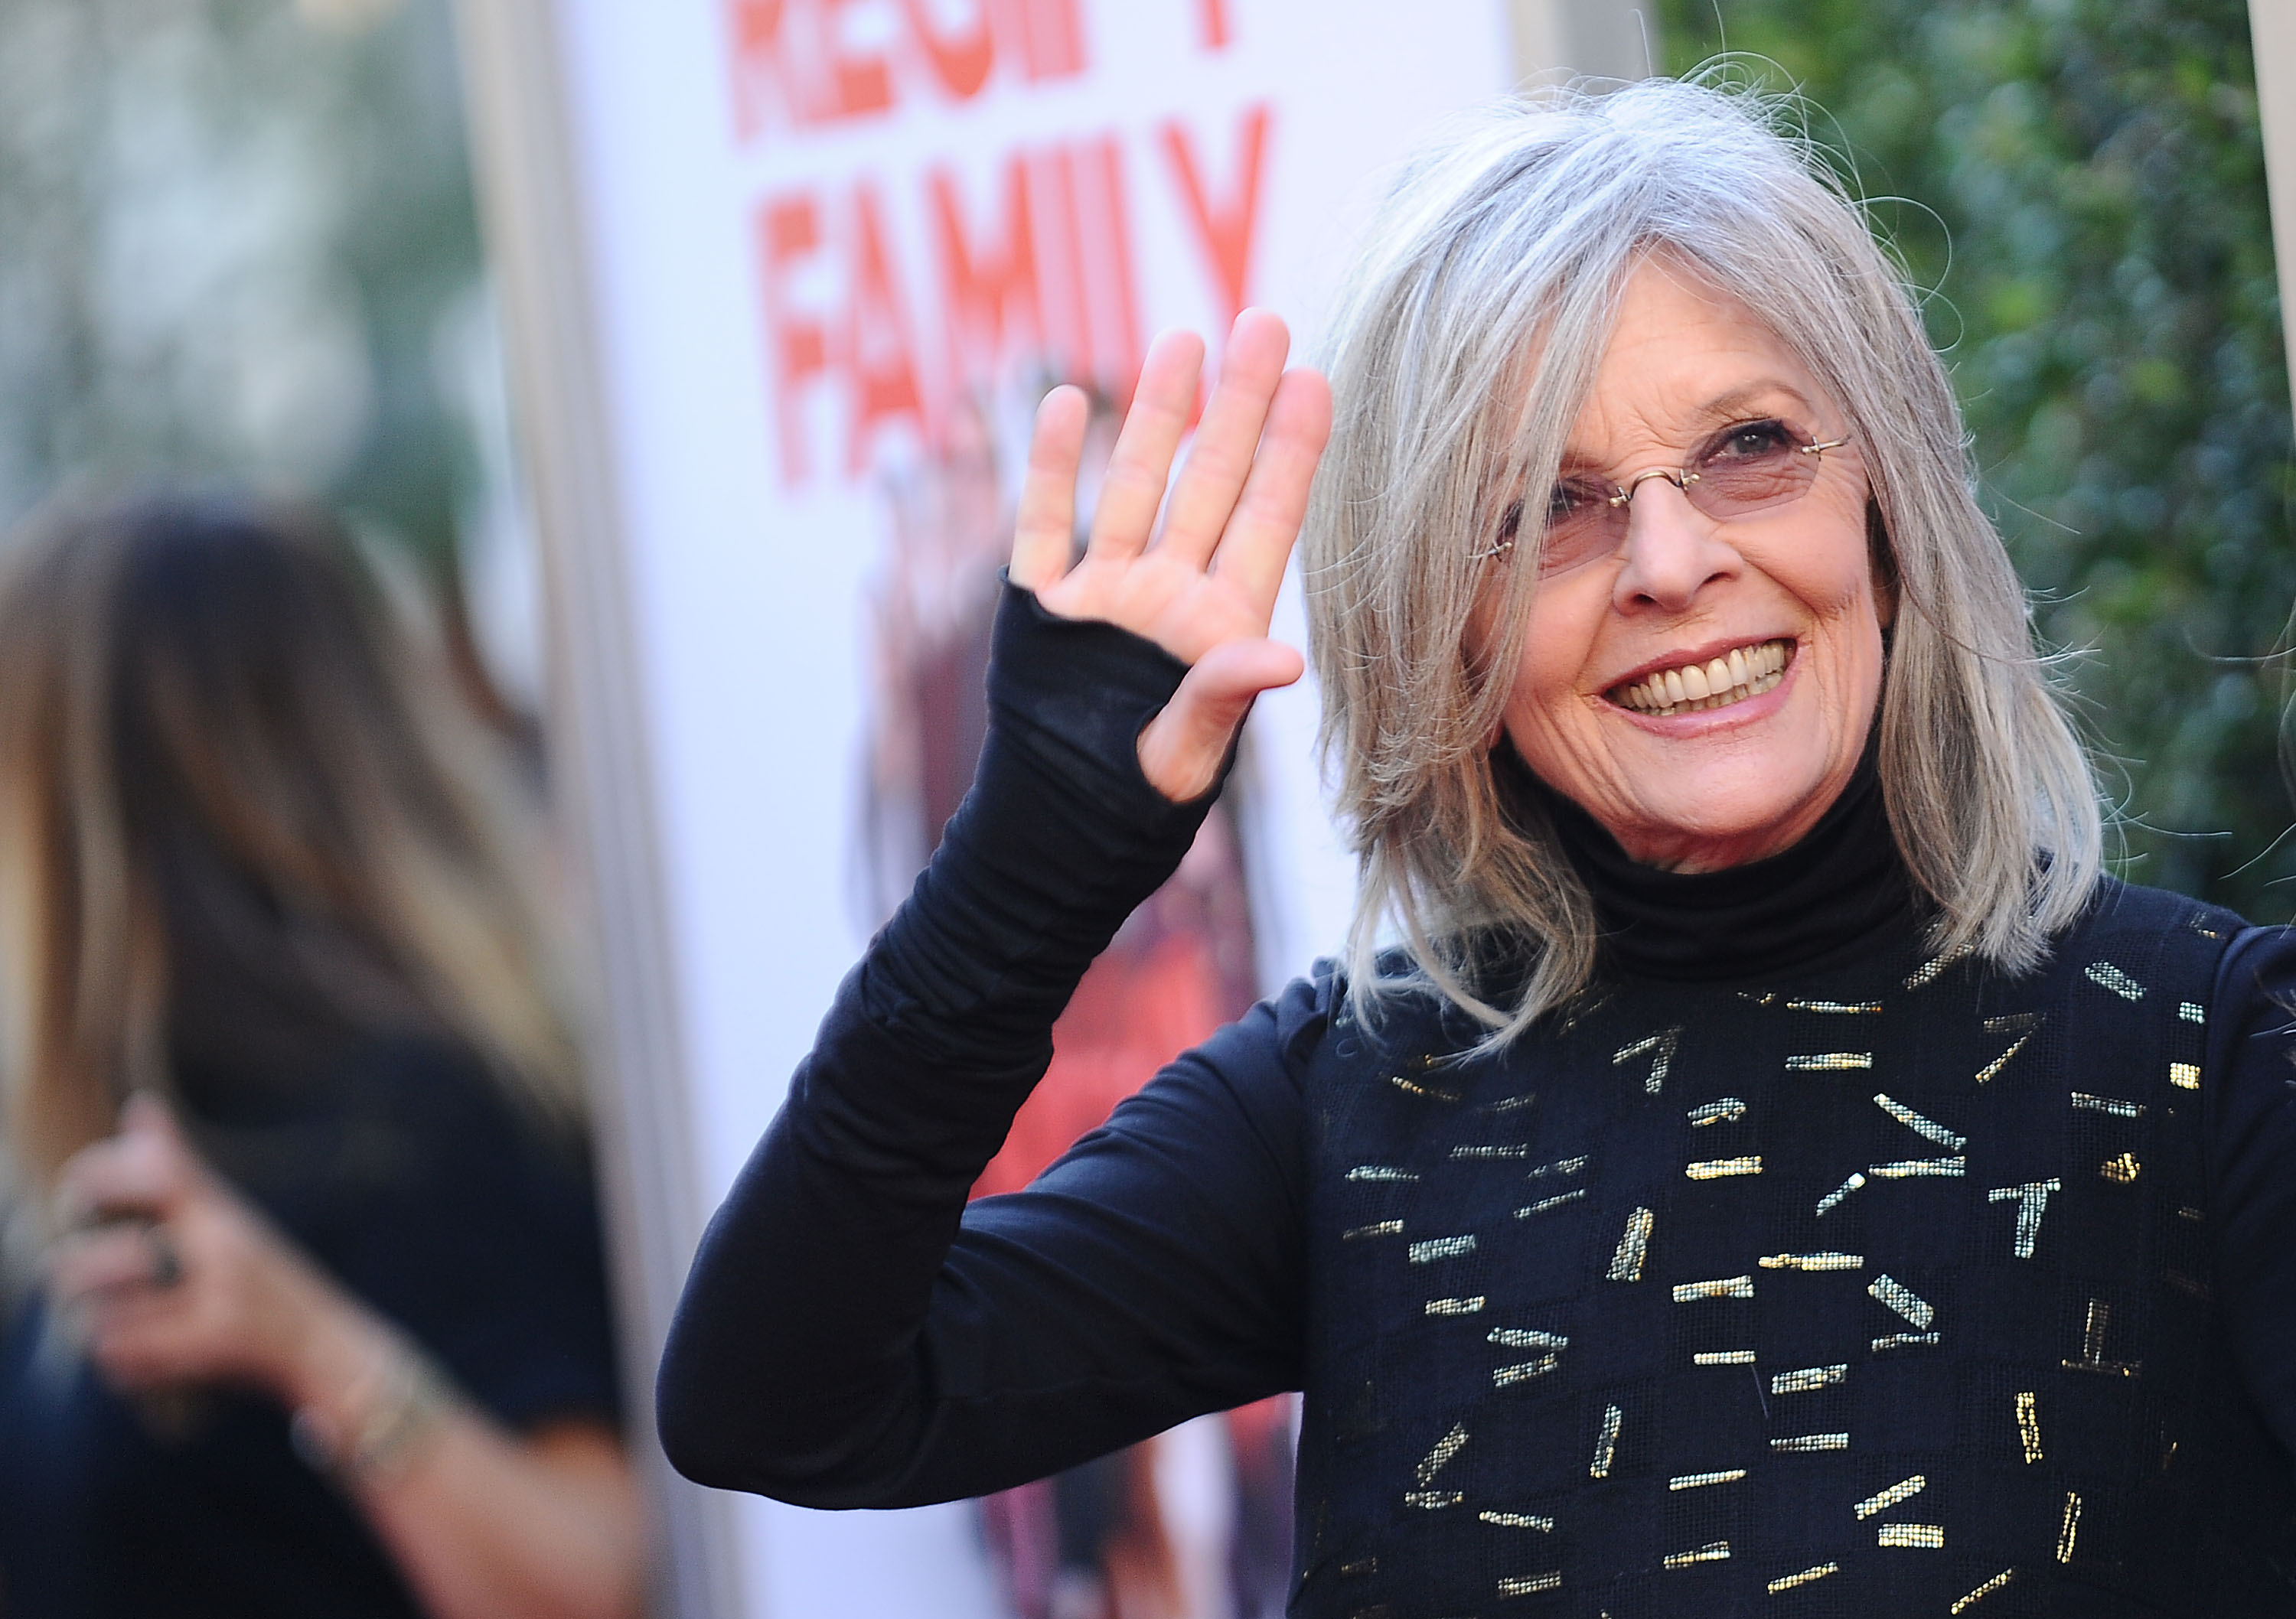 Diane Keaton at the premiere of "Love The Coopers" in Los Angeles, 2015 | Source: Getty Images